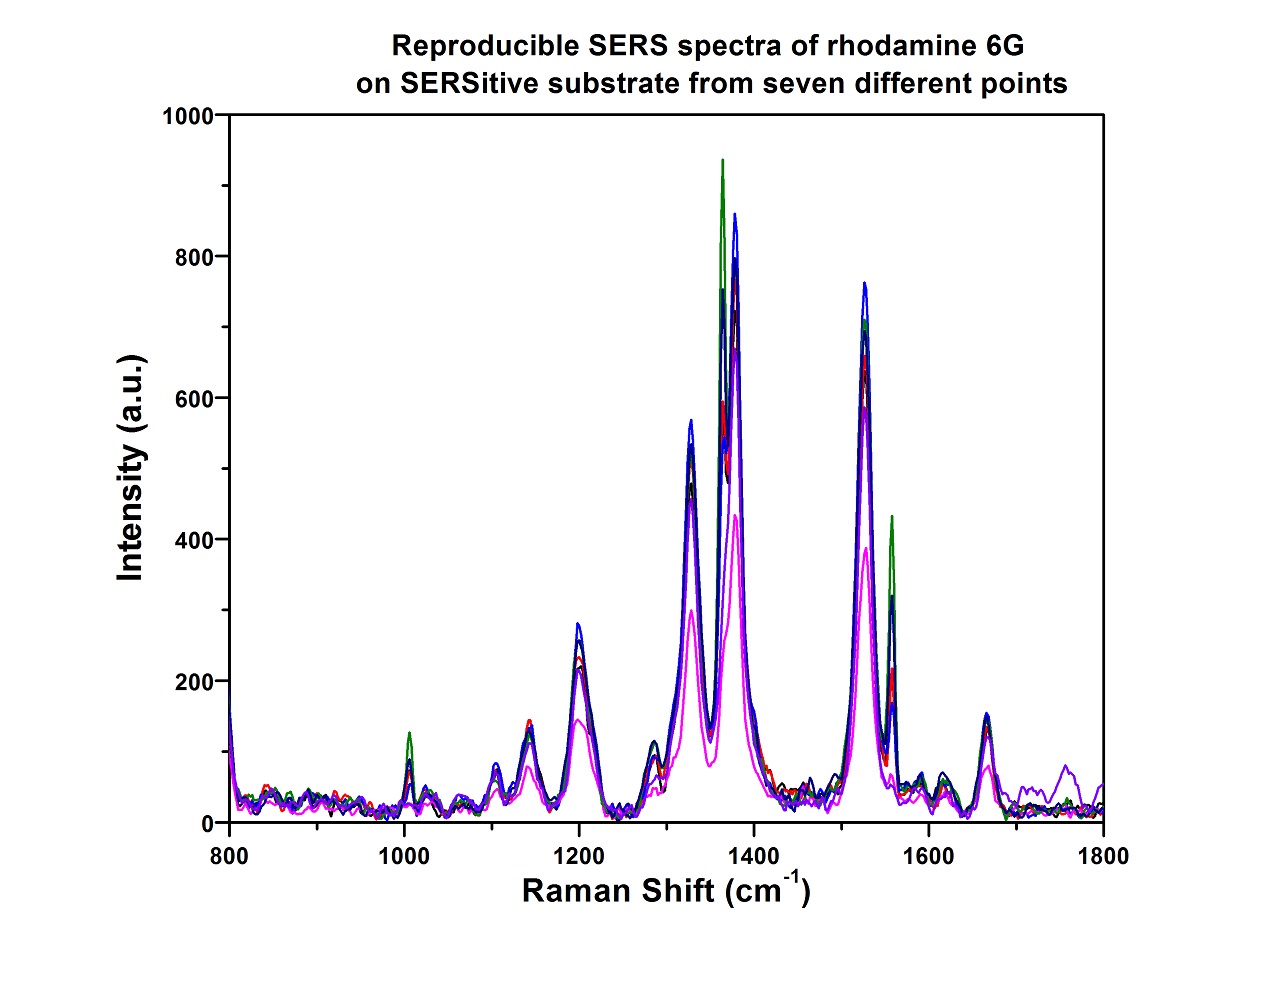 SERS Spectra of Rhodamine 6G by Tezpur University, India